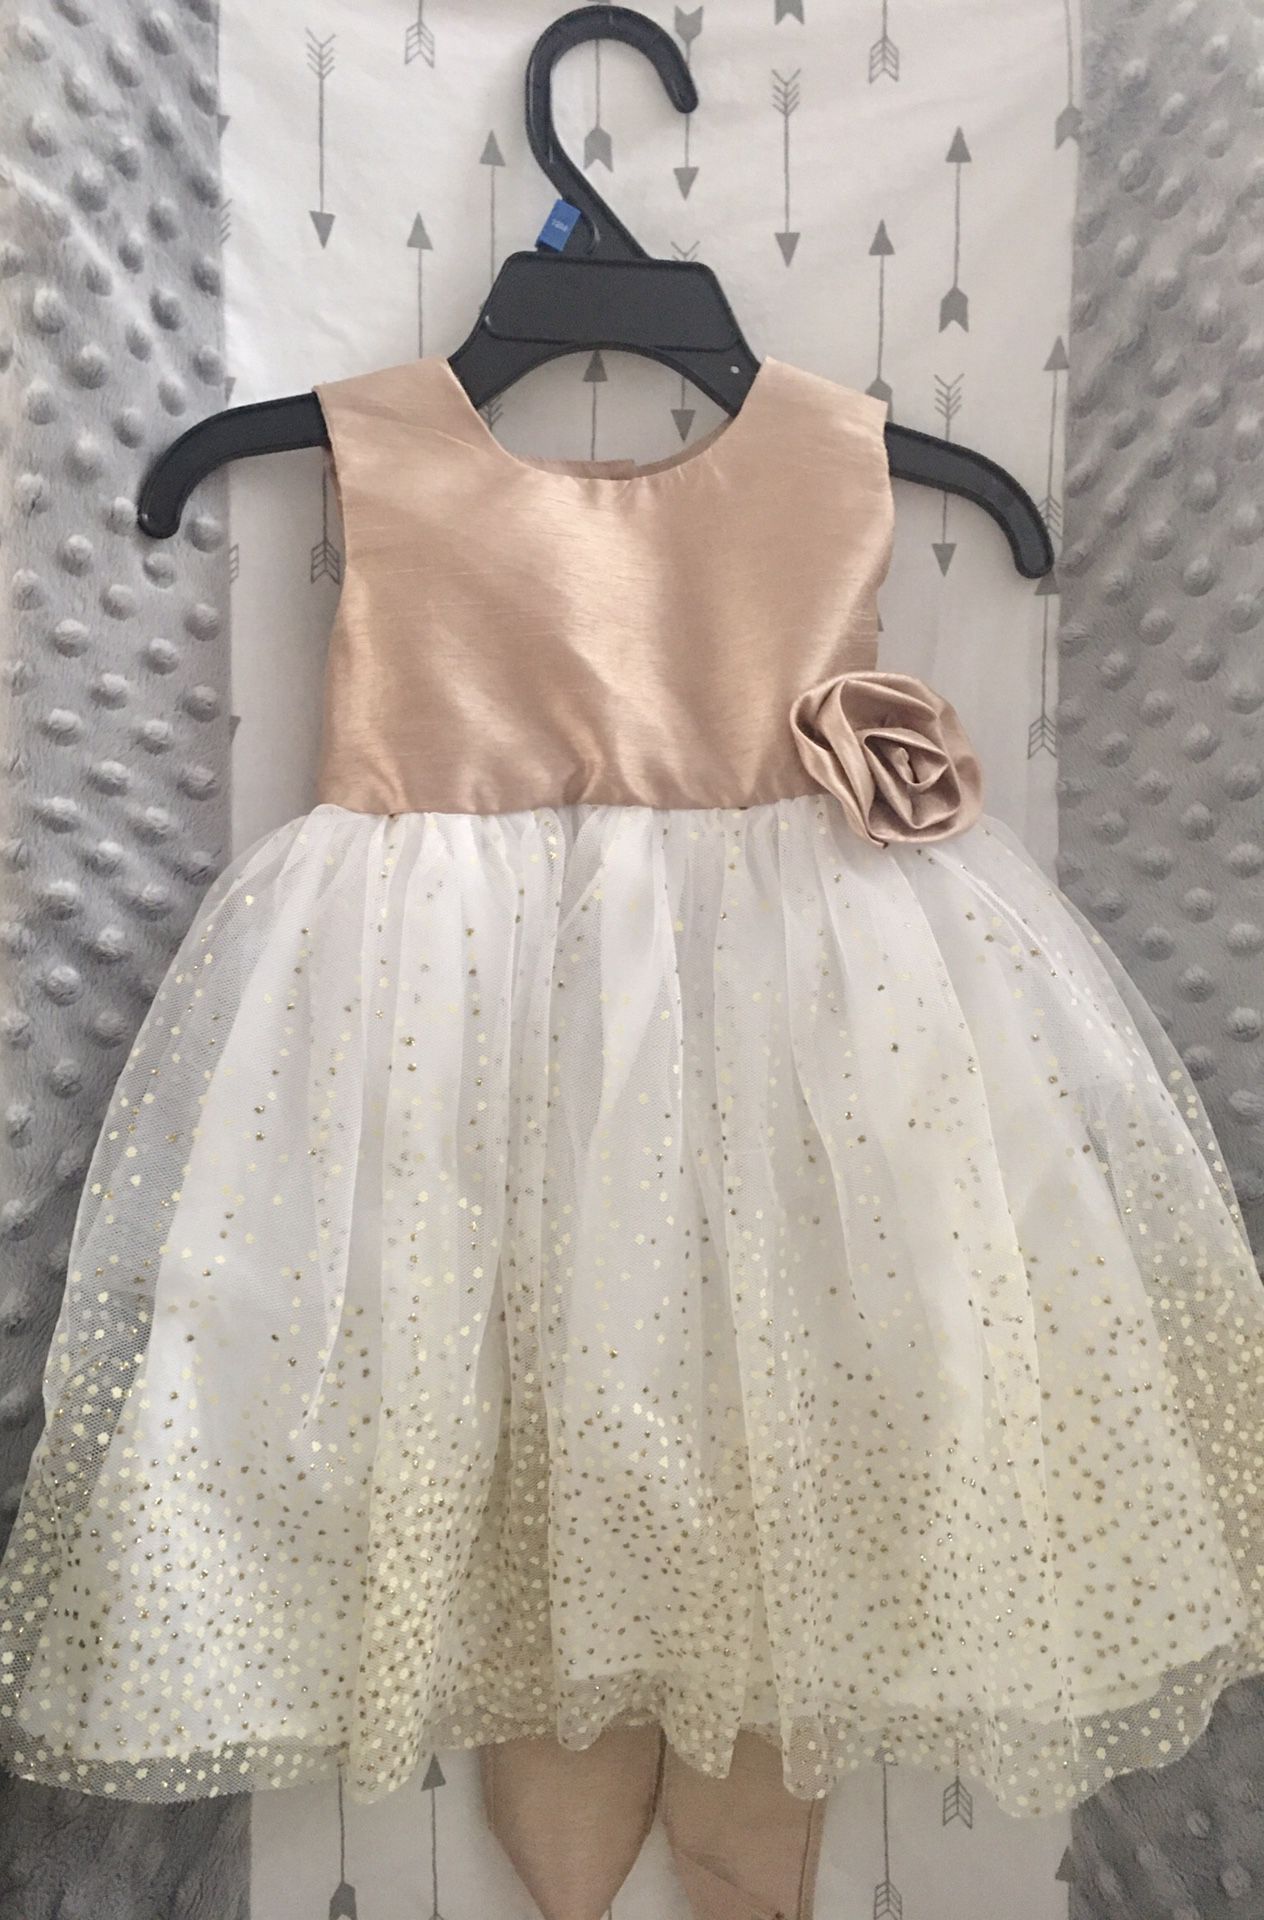 Baby’s Christmas dress / formal / flower girl size 12 month